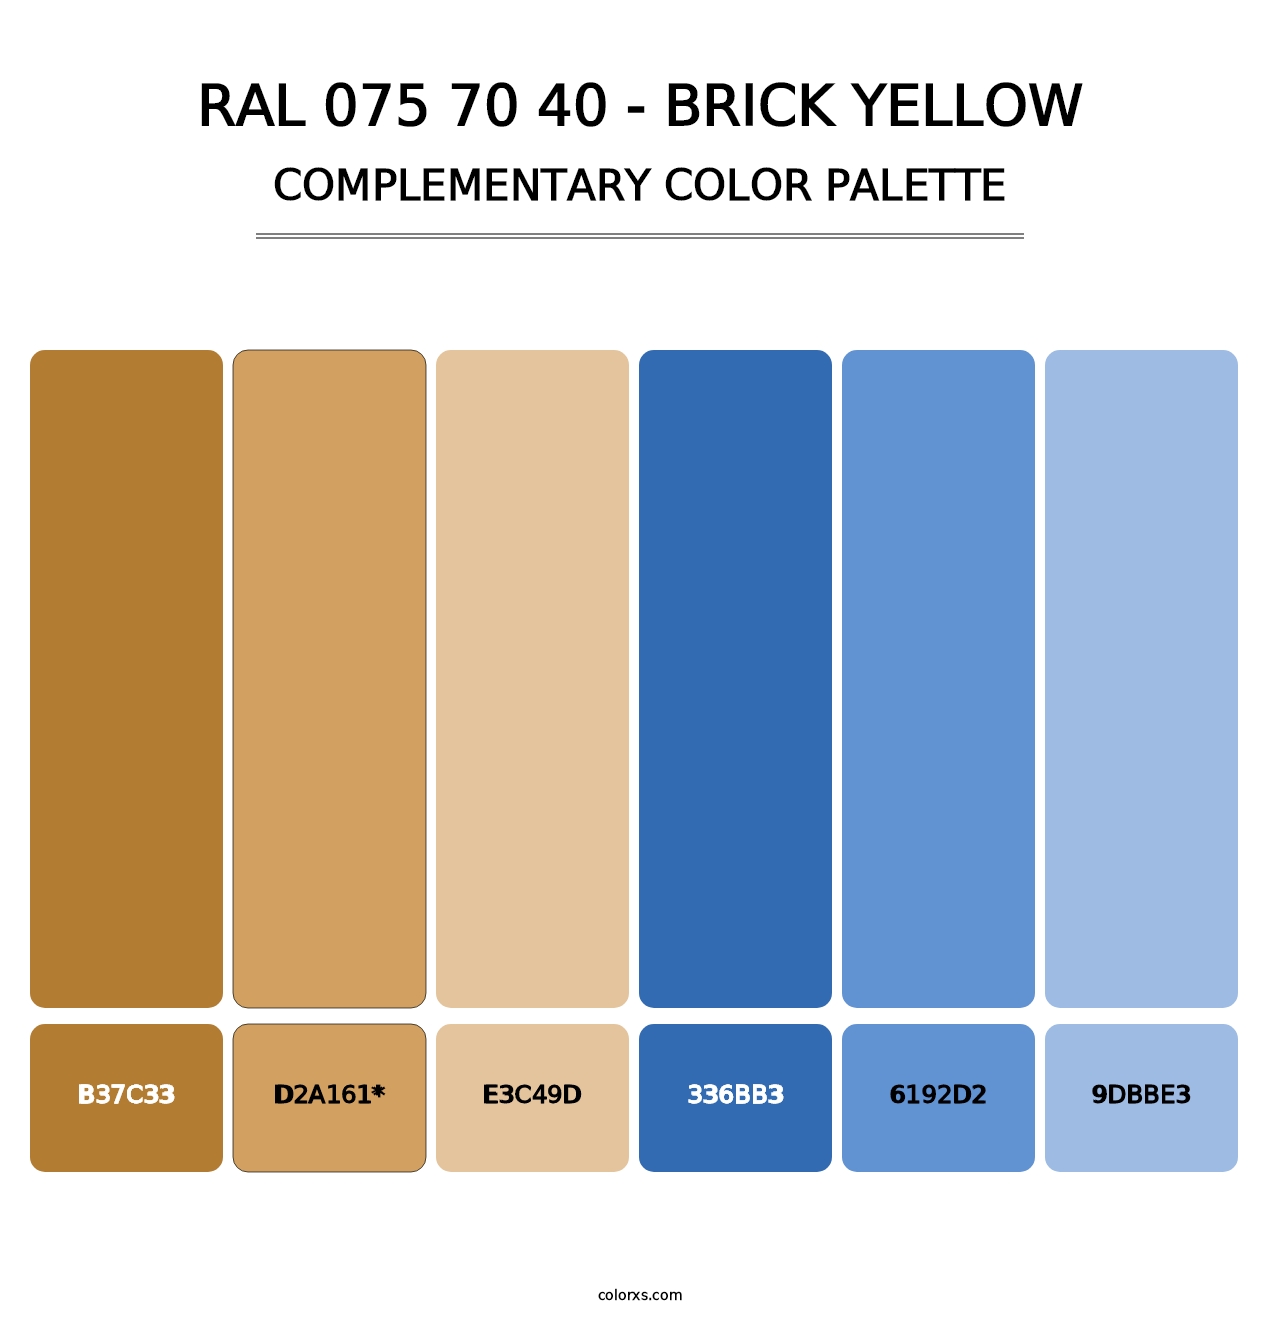 RAL 075 70 40 - Brick Yellow - Complementary Color Palette